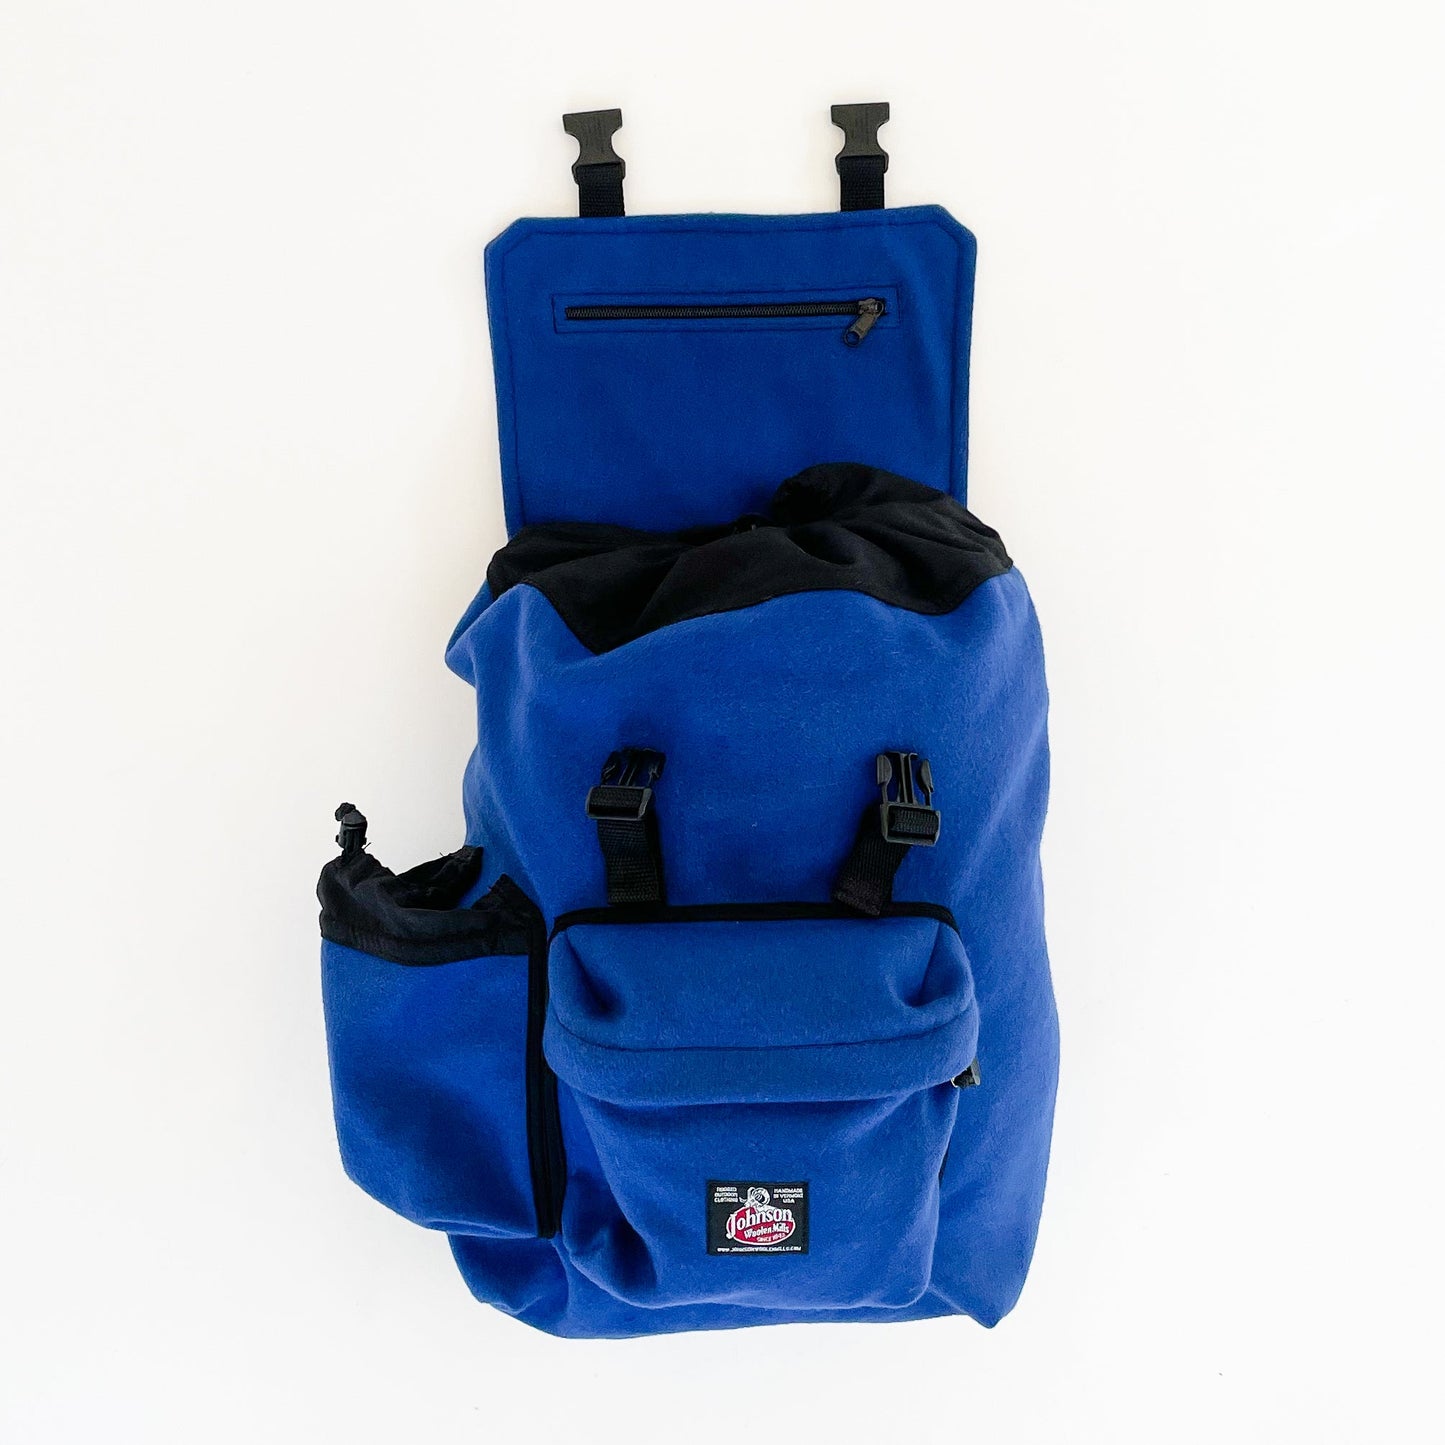 ohnson Woolen Mills Daypack Royal Blue front view with water bottle in side pocket and top flap open